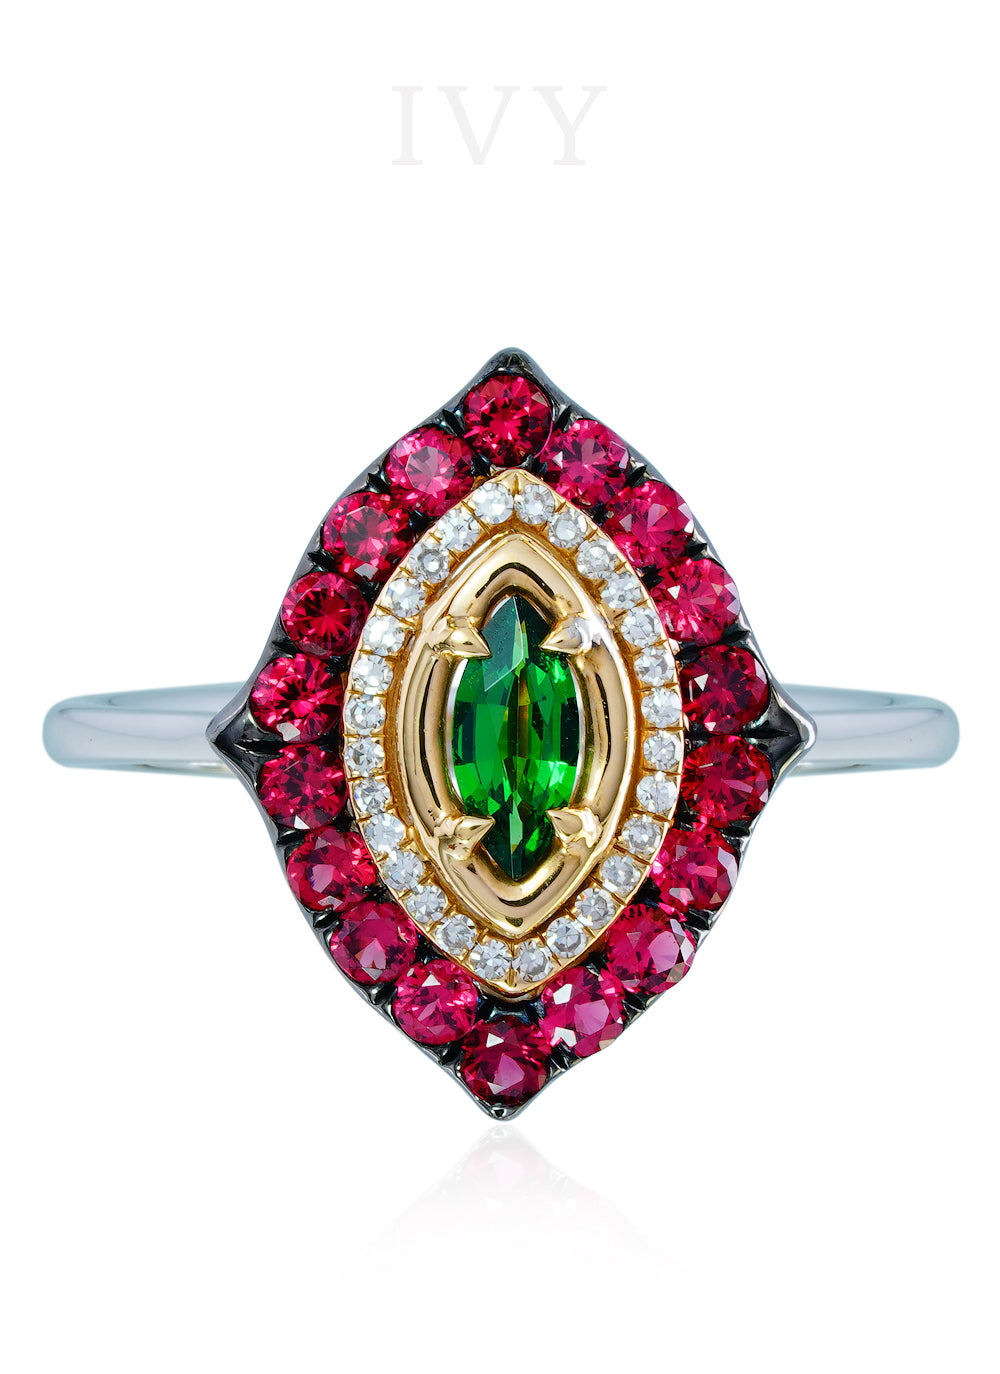 La Marchesa Ring with Tsavorite and Red Spinel